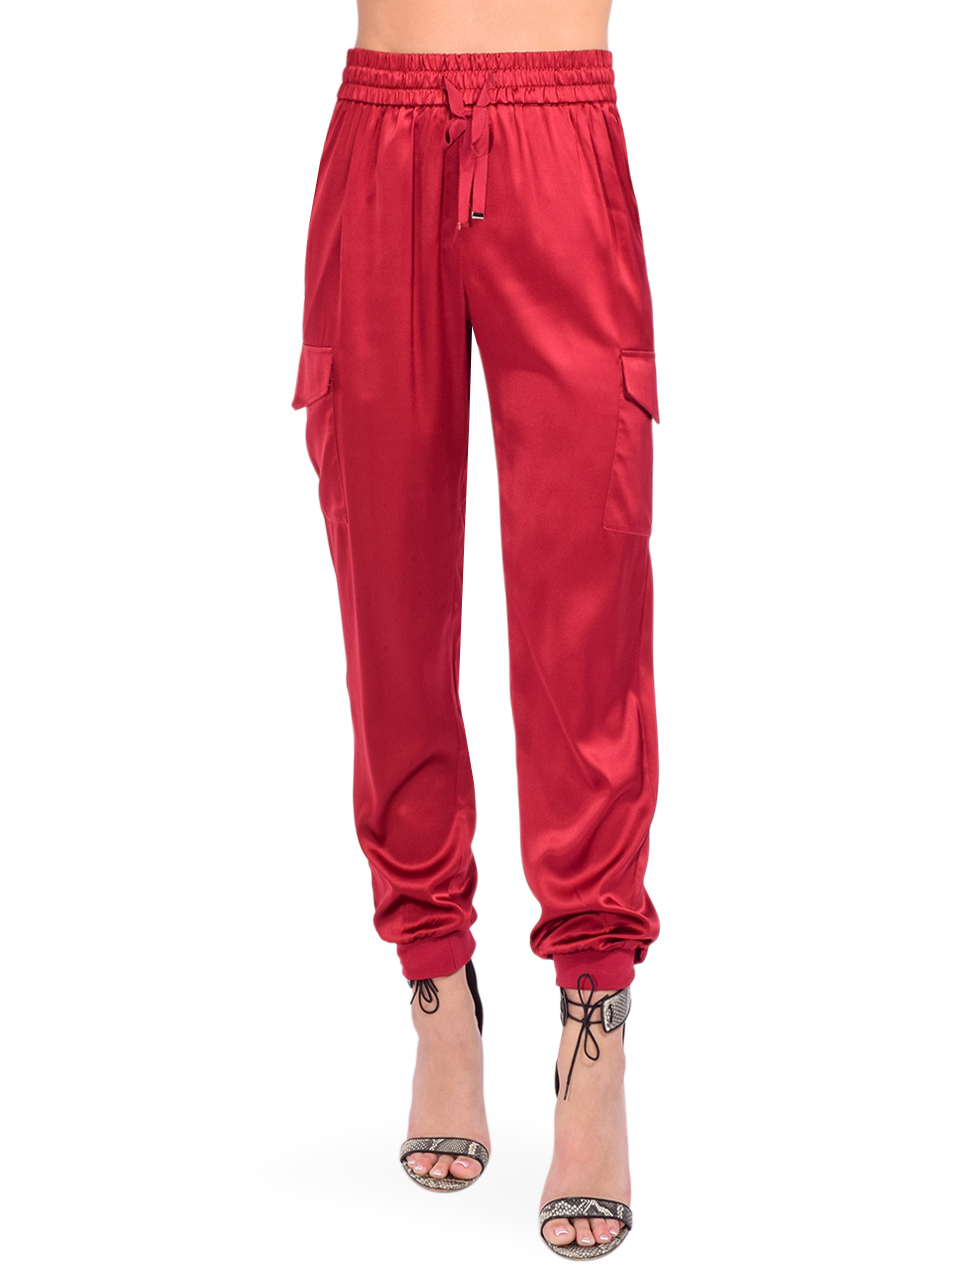 CAMI NYC Elsie Pant in Mulled Wine Front View 